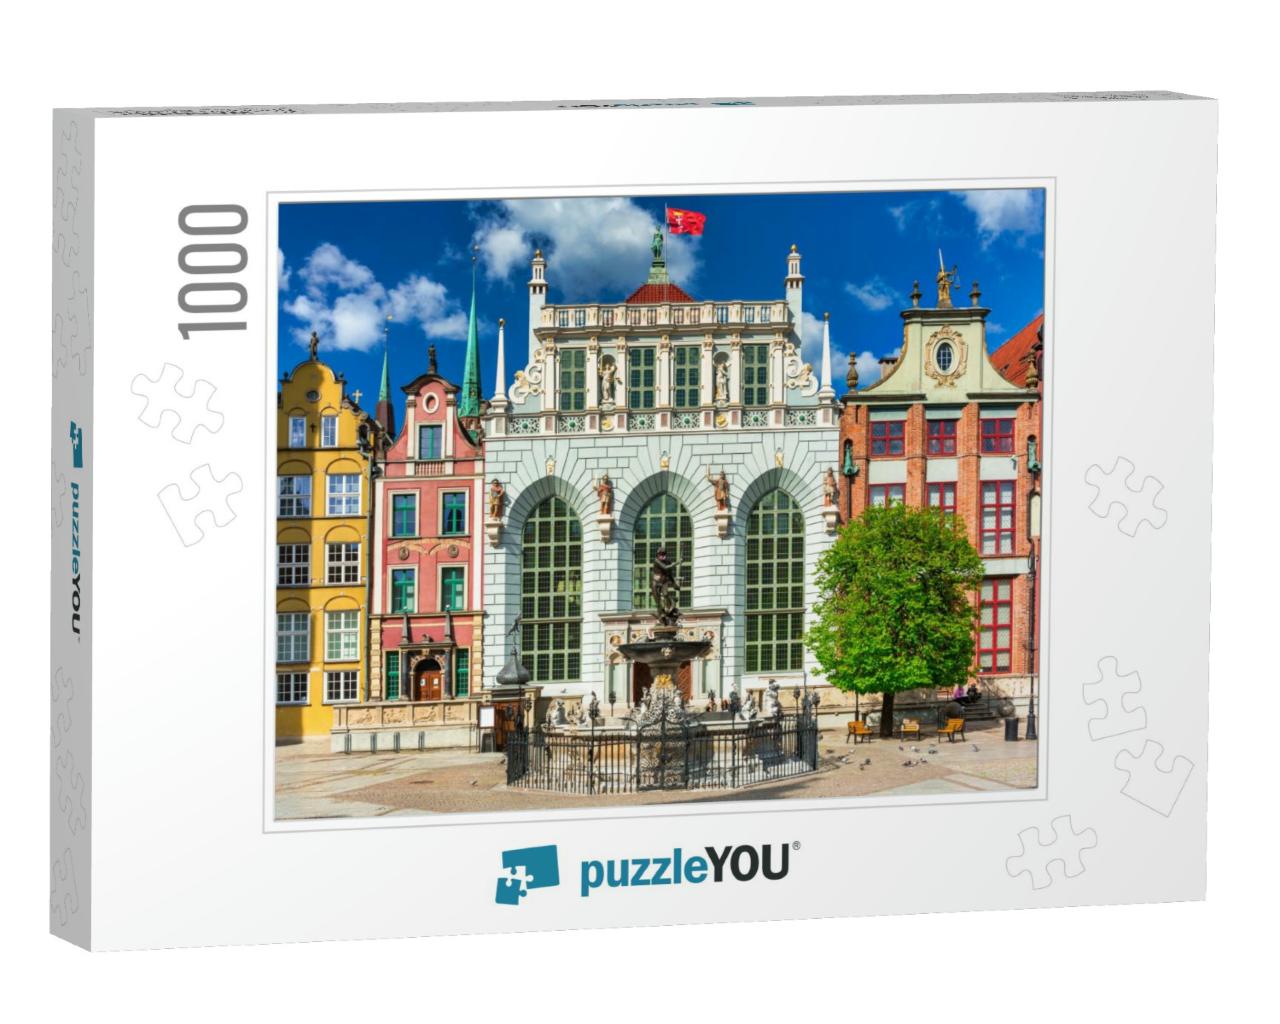 Beautiful Architecture of the Old Town in Gdansk with Art... Jigsaw Puzzle with 1000 pieces